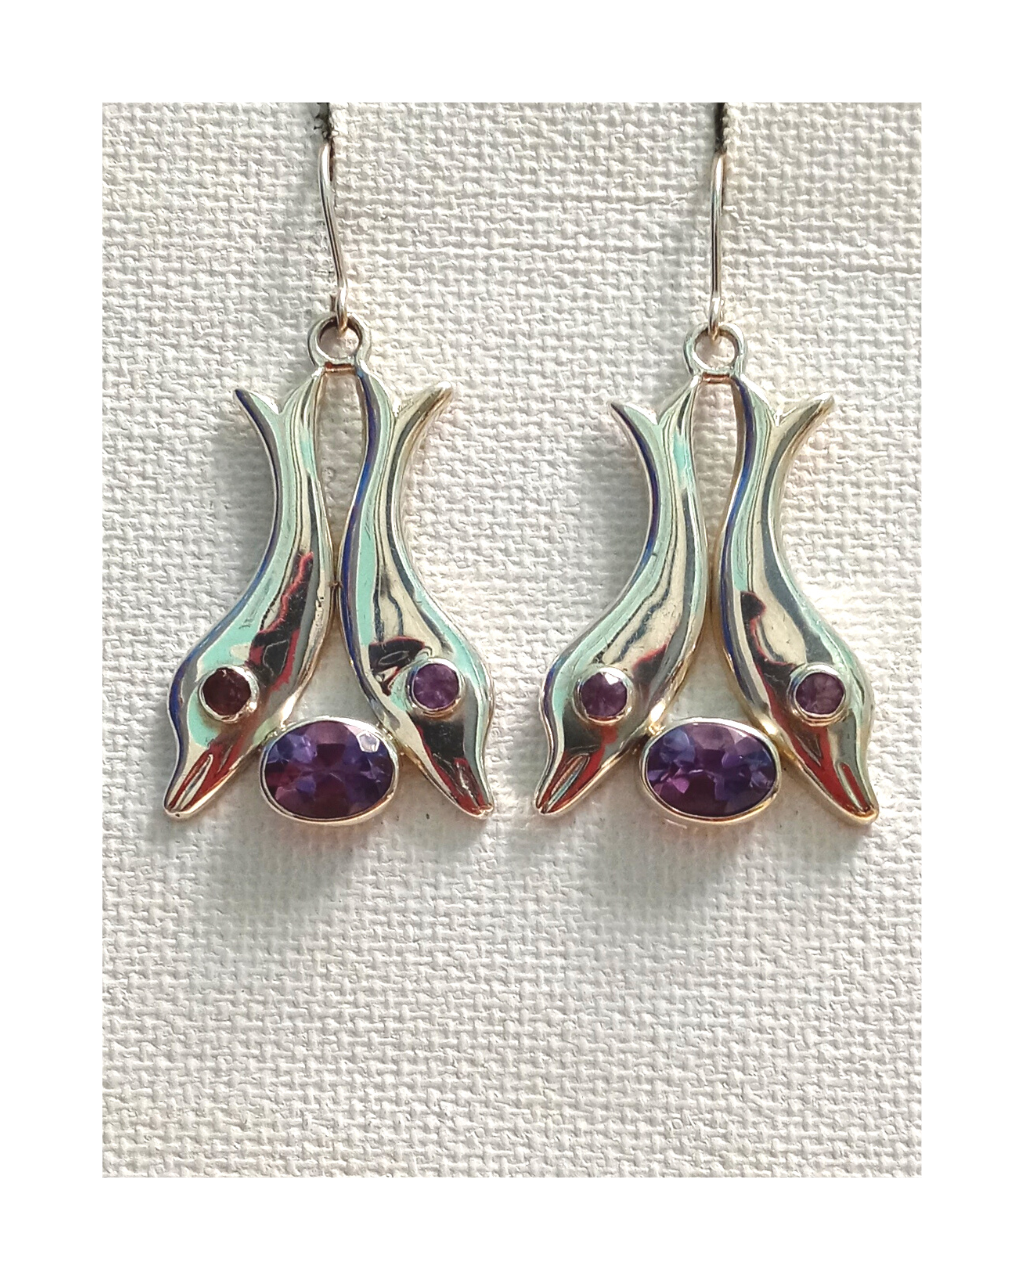 Sterling Amazing Polished 2 Dolphins with Amethysts Earrings 1 13/16"L X 7/8"W